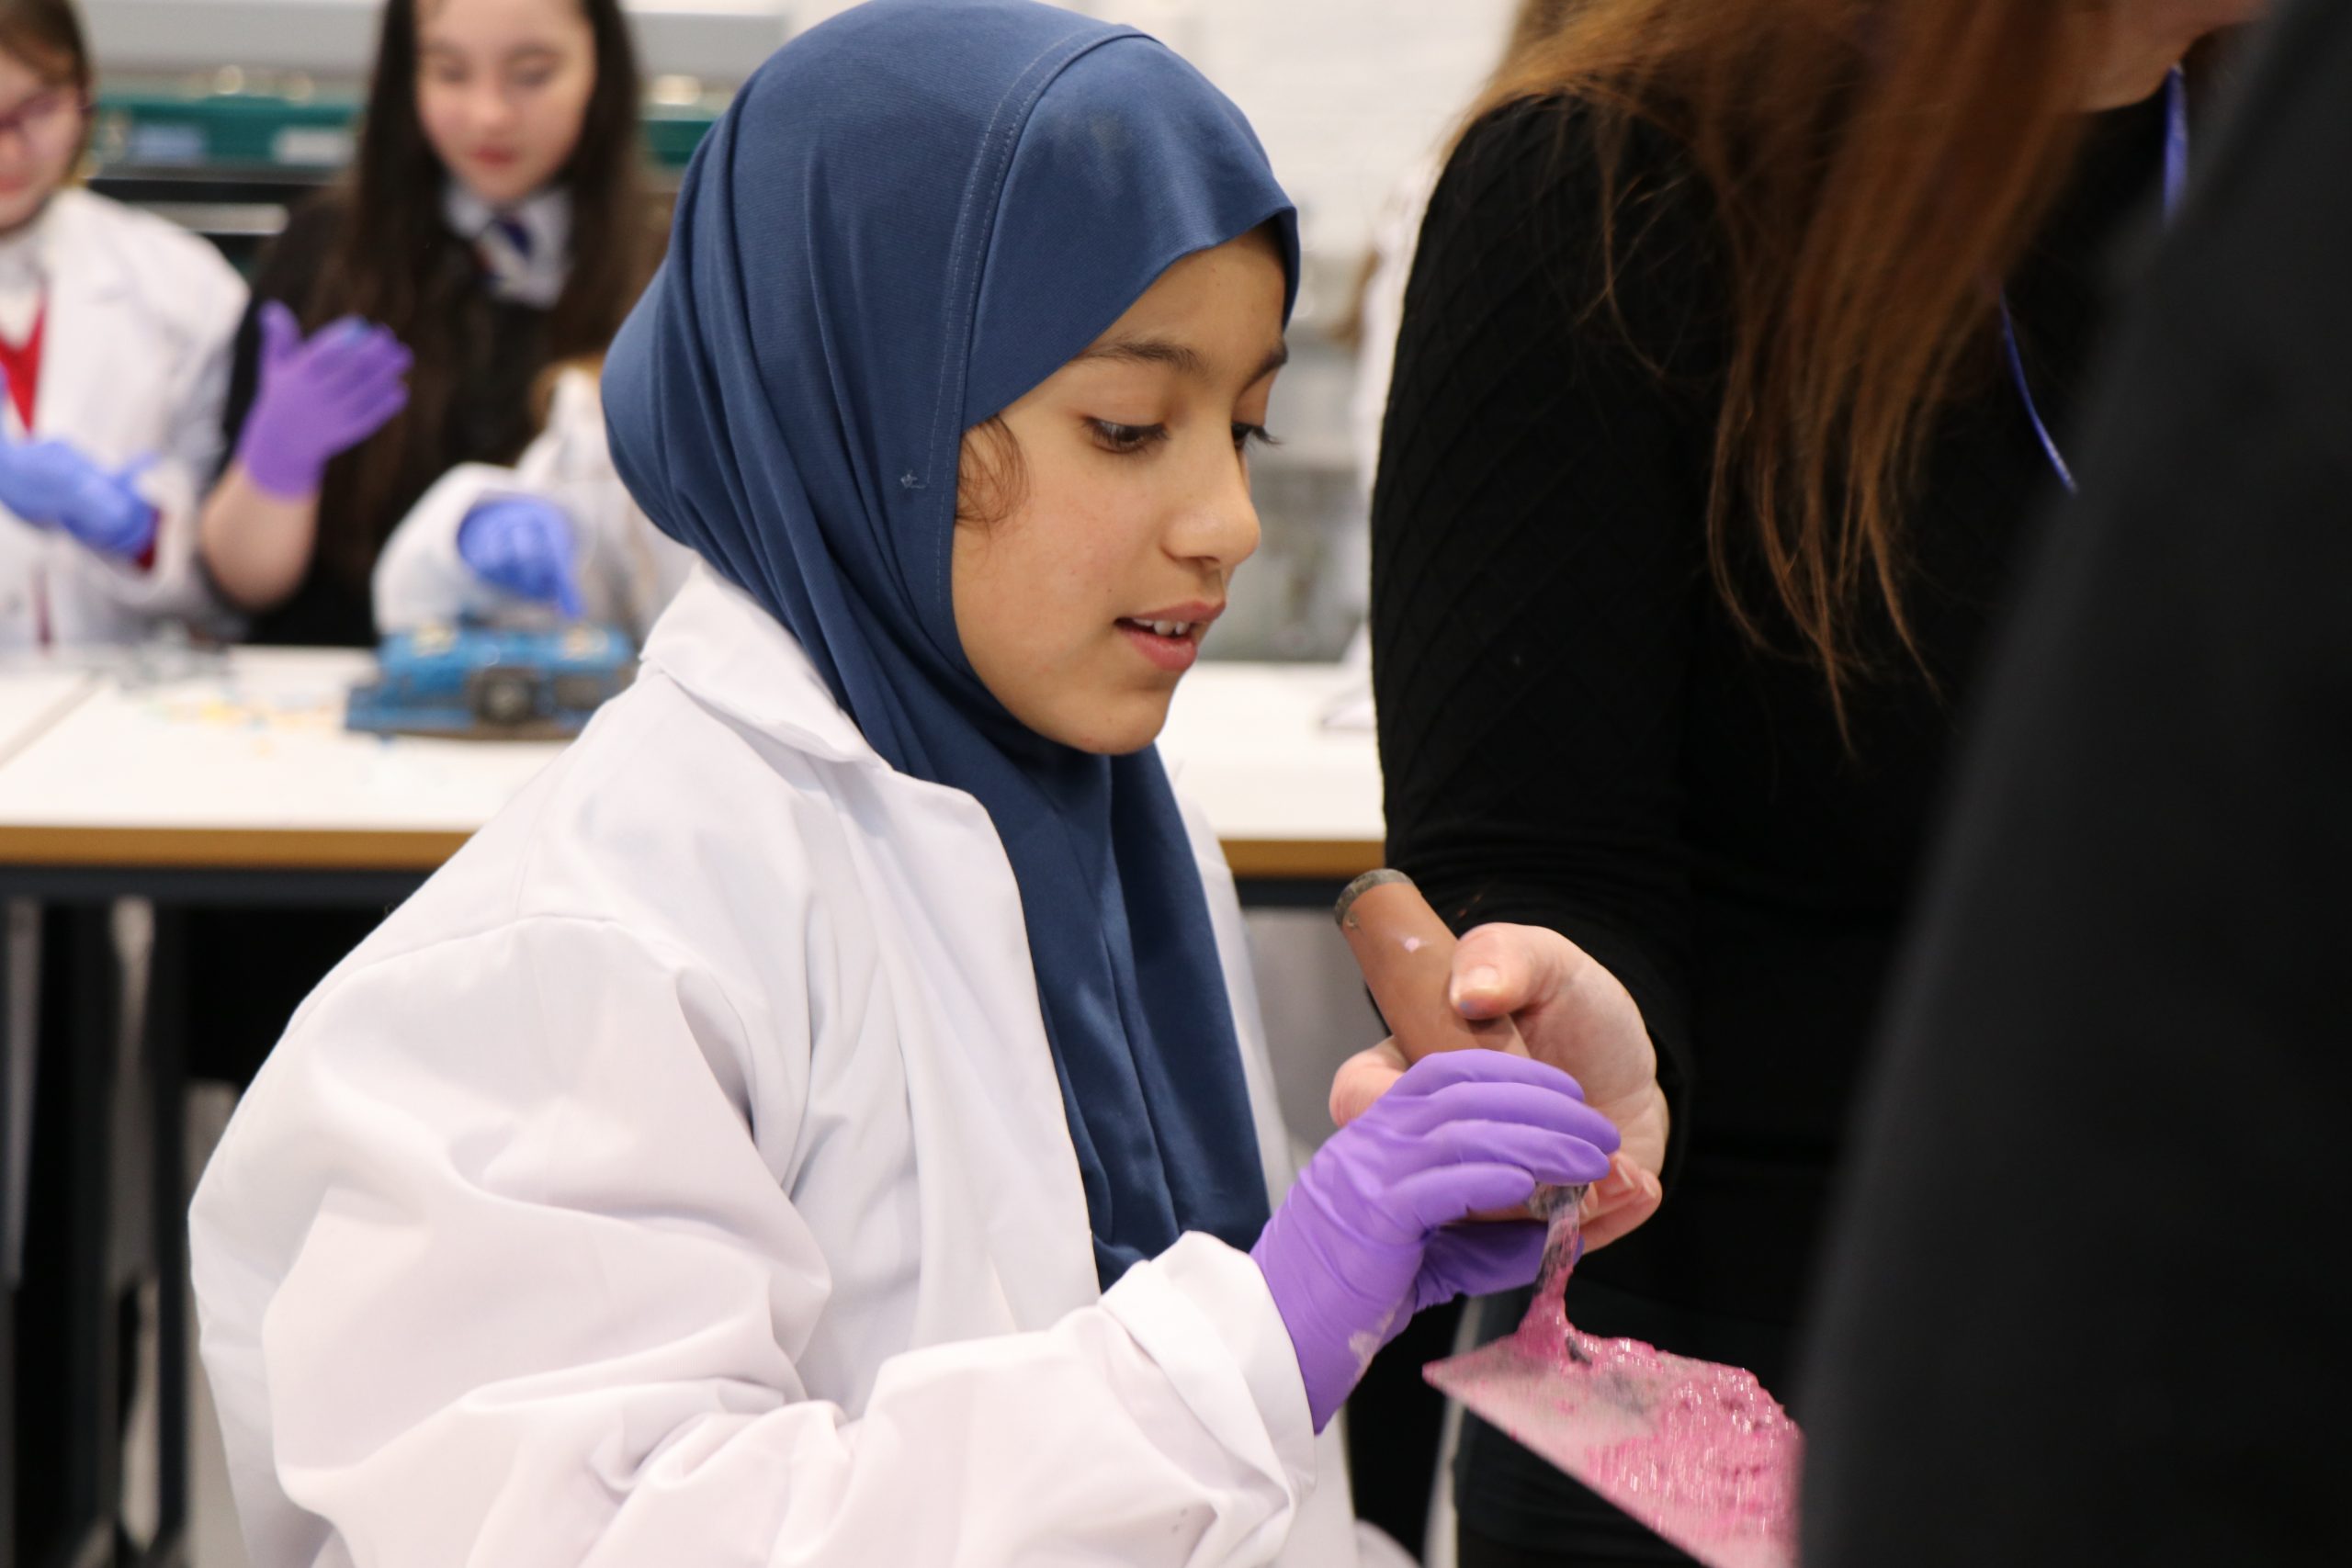 Dundee University is engaging girls in STEM subjects - News